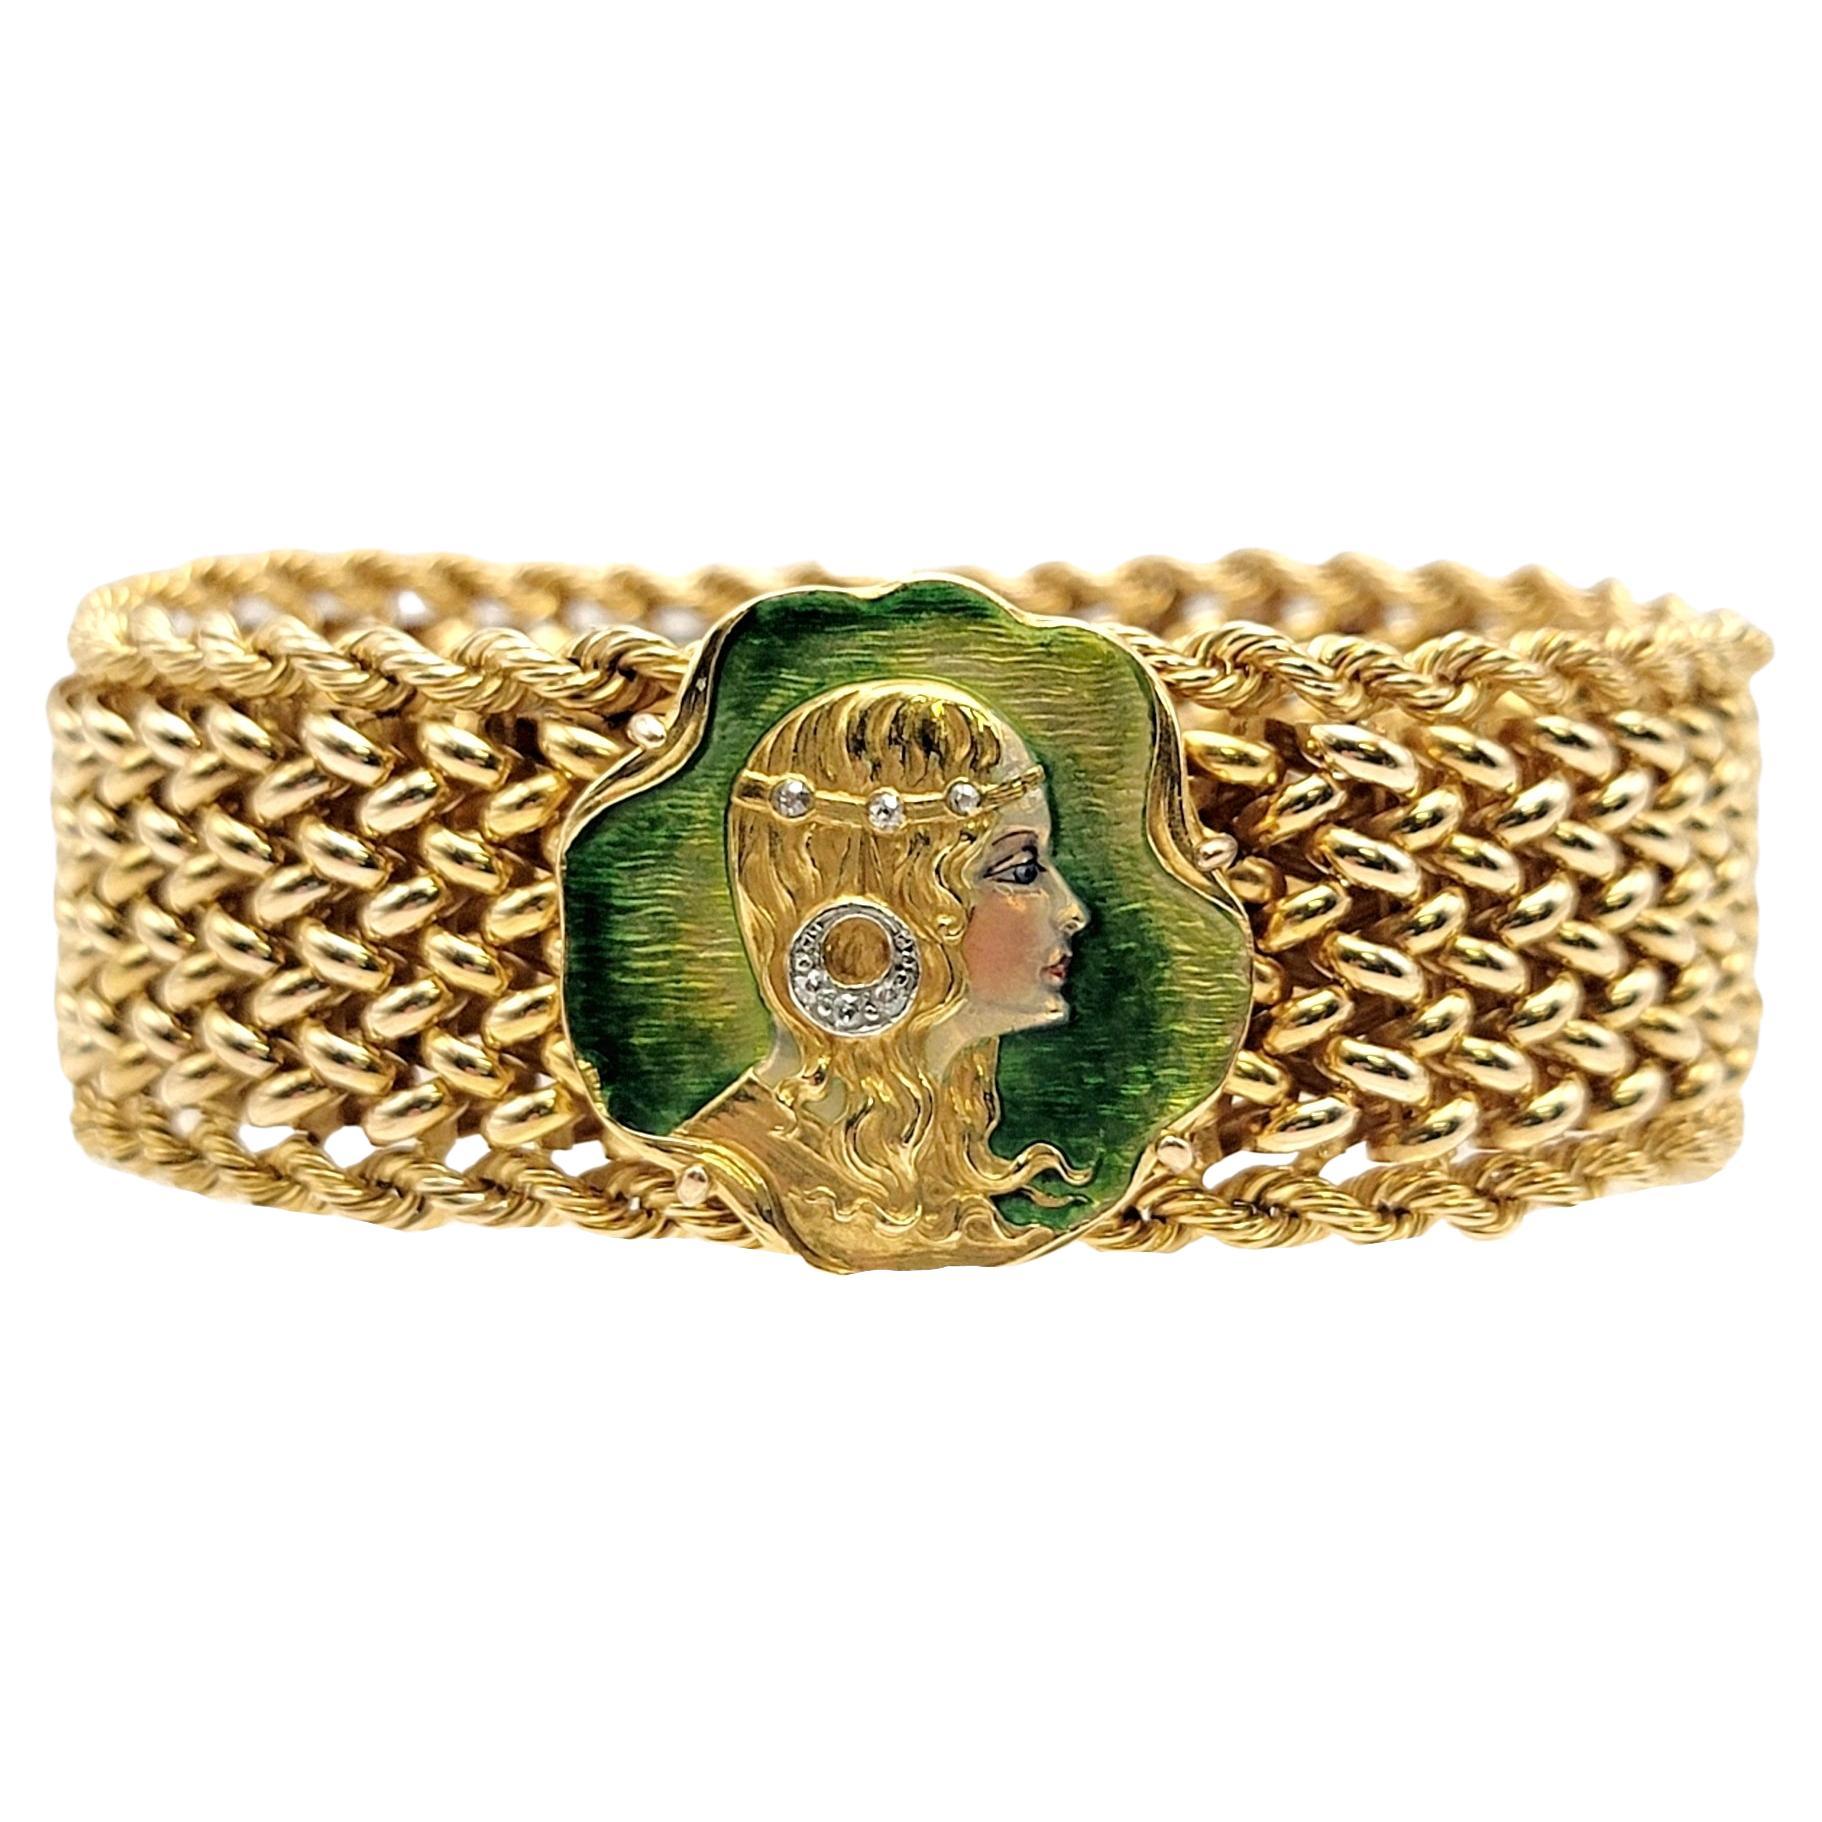 Adorn your wrist with this charming piece of history. This beautiful and unique bracelet features a vintage Art Nouveau enamel portrait mounted on 18 karat yellow gold. The portrait features a green background with the profile of young woman